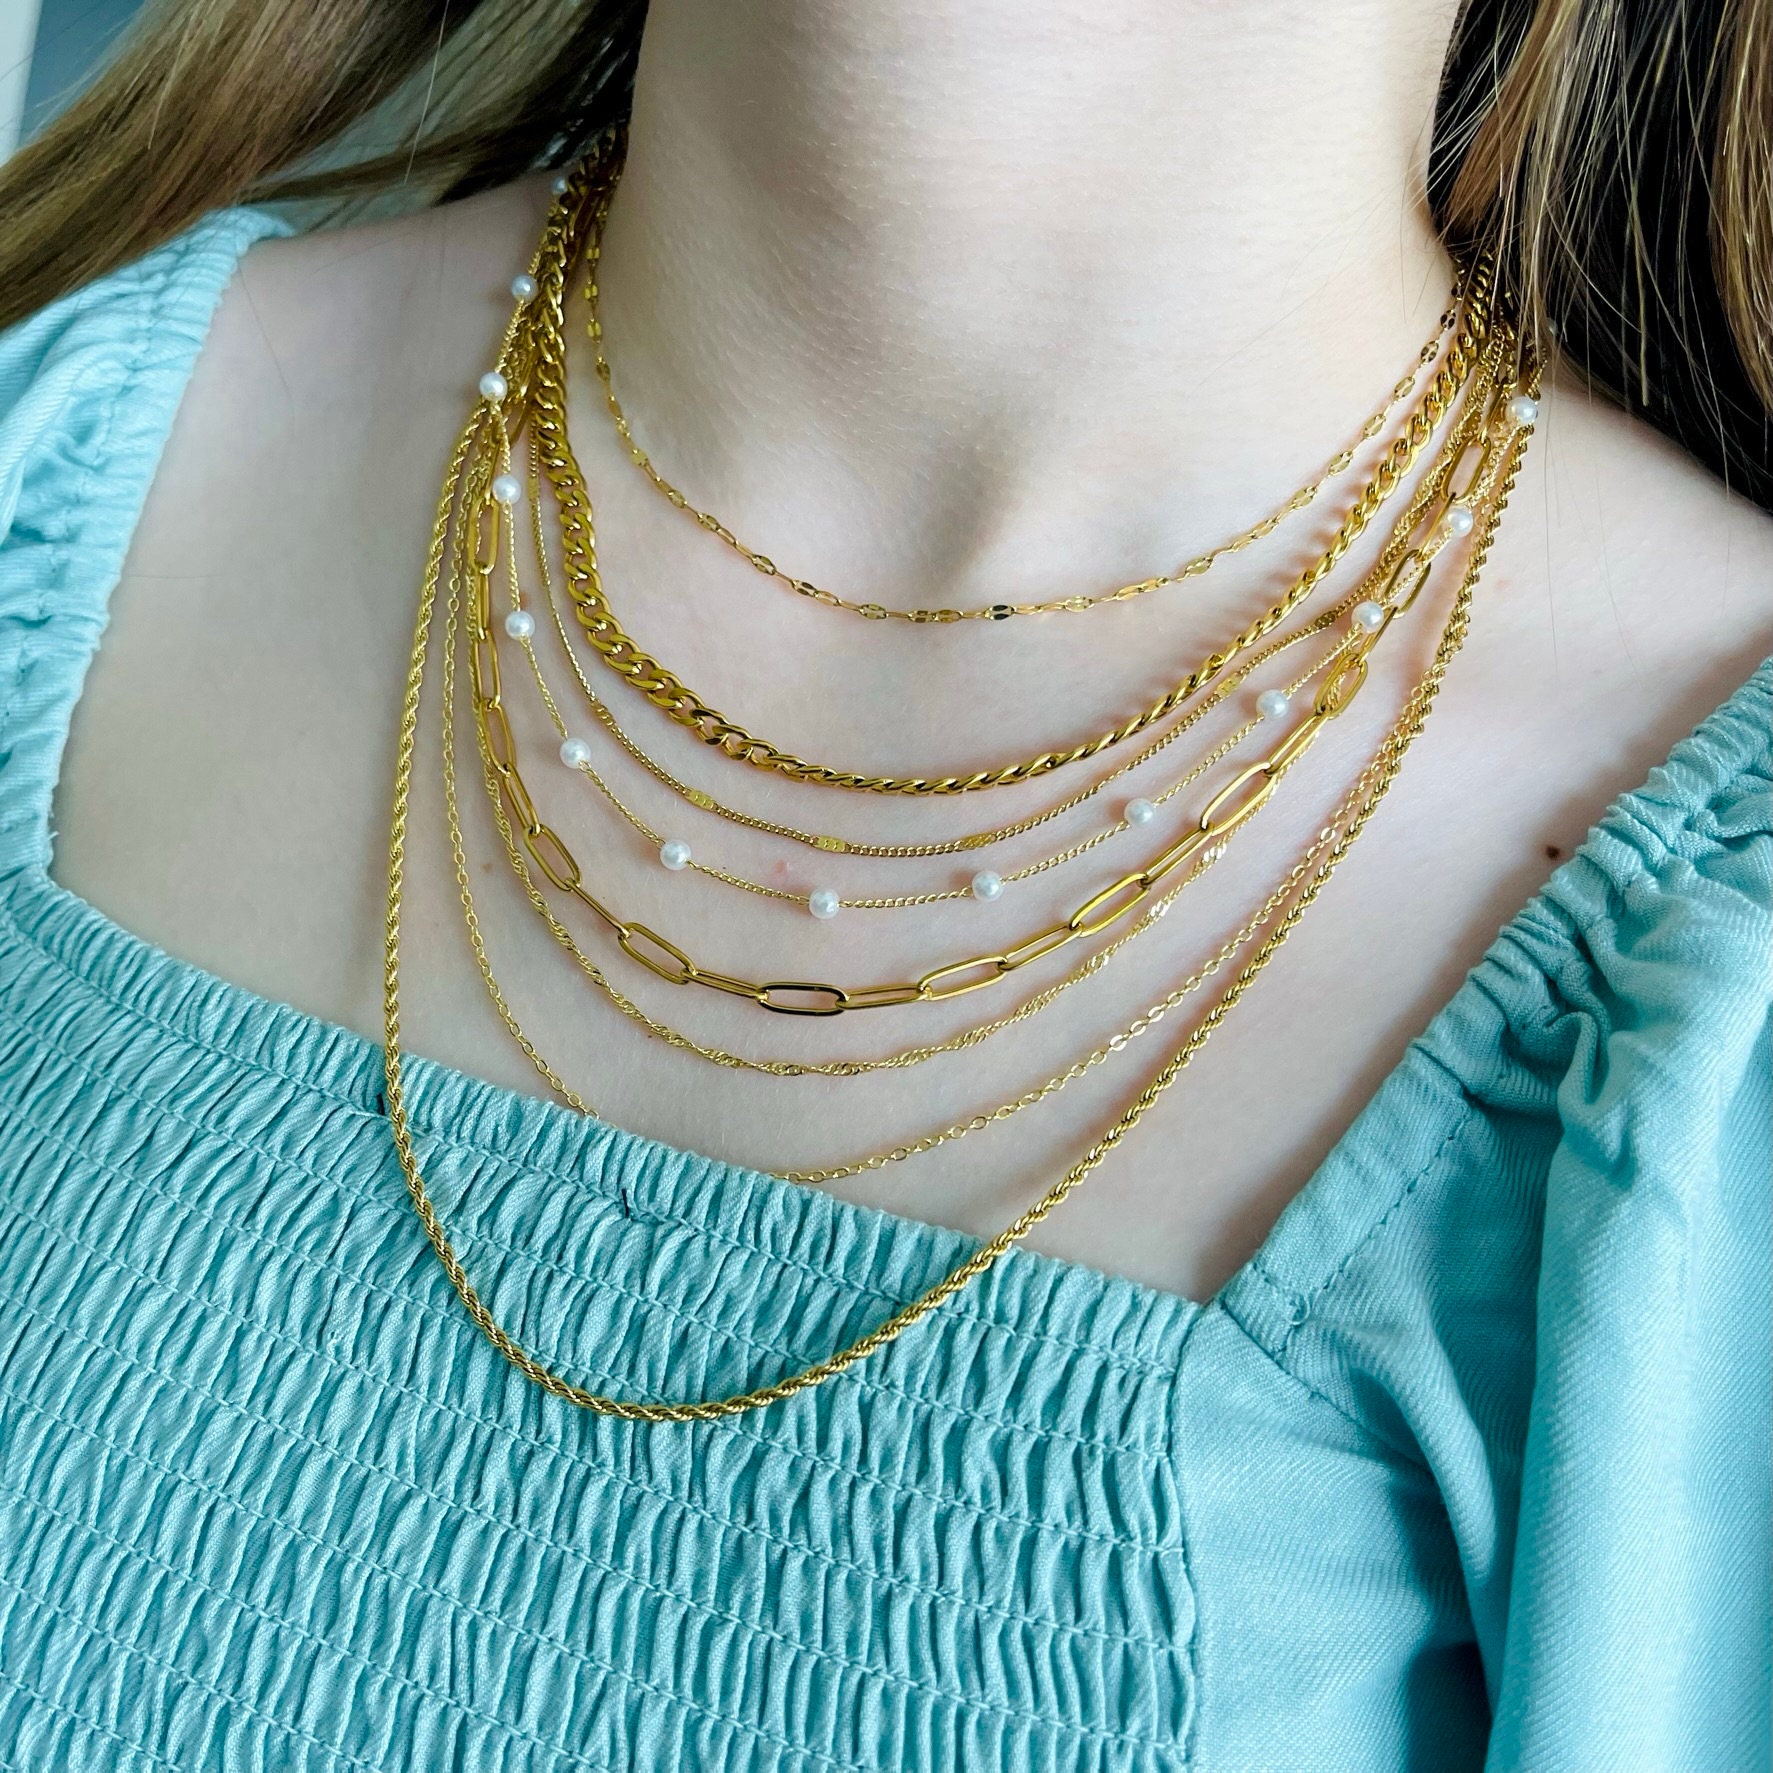 Sierra Paperclip Chain - Everly Made Gold Filled